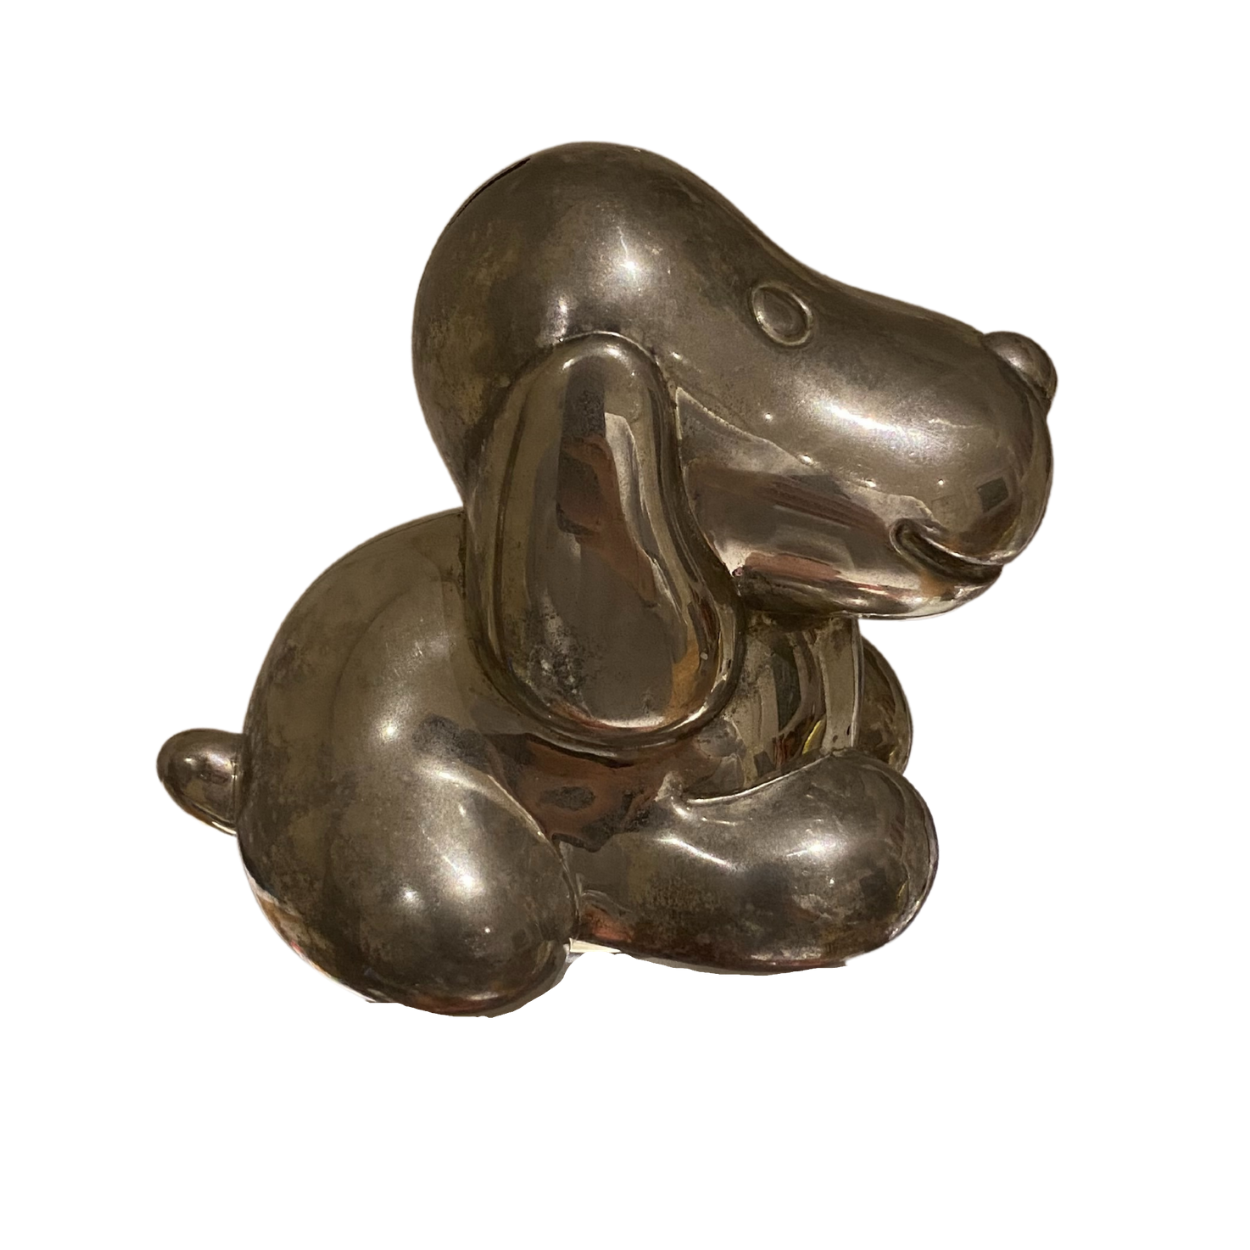 A photo of a small piggy bank in the shape of a hound, made of brass facing right.